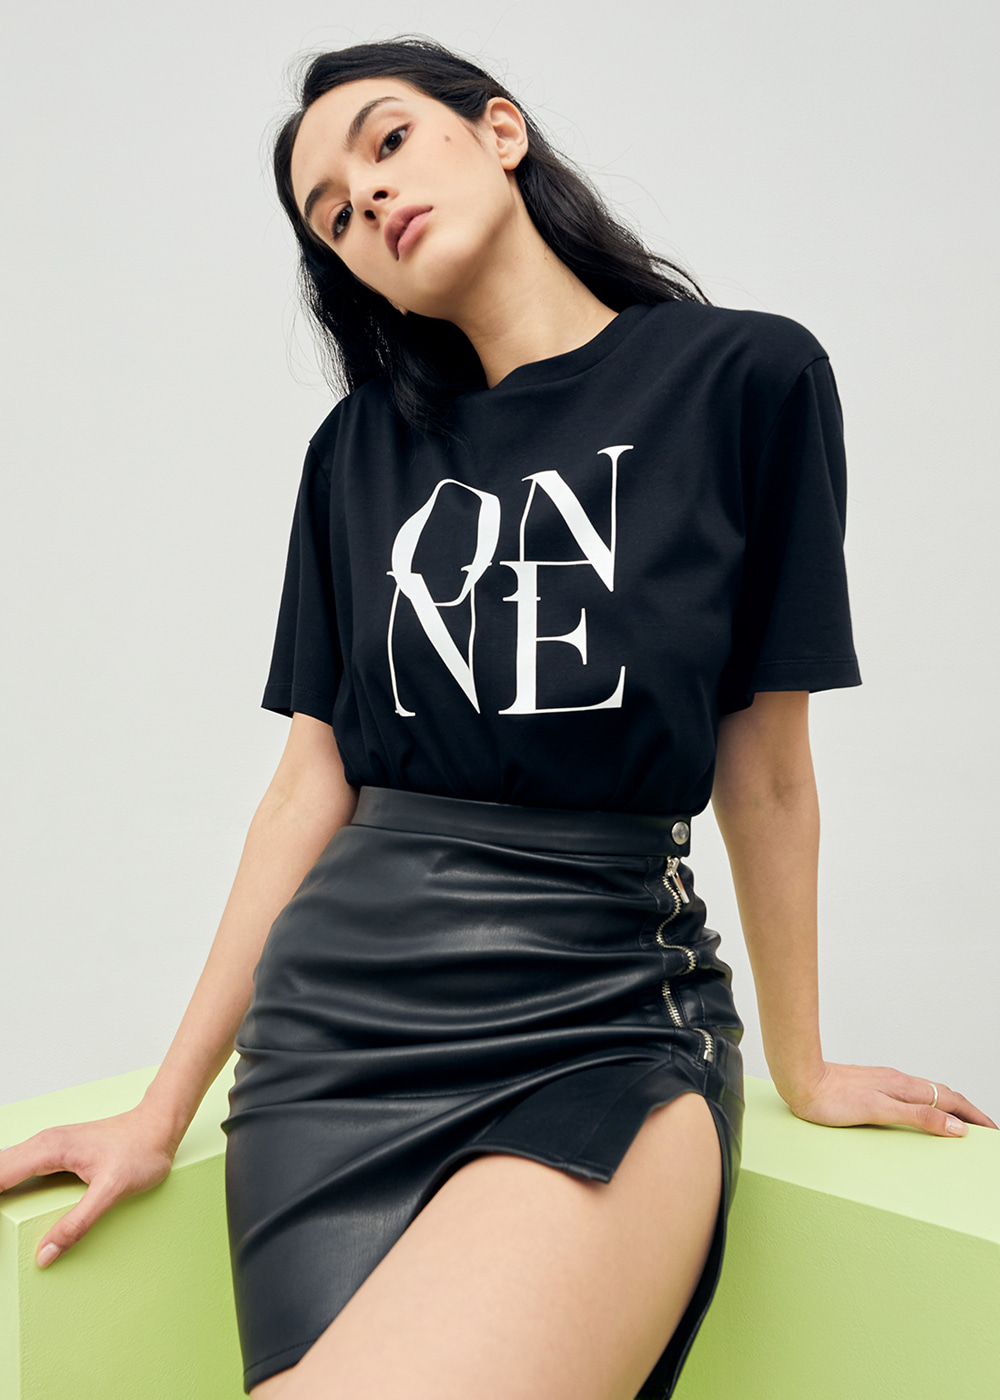 Tape-pointed ONNE T-Shirt Black